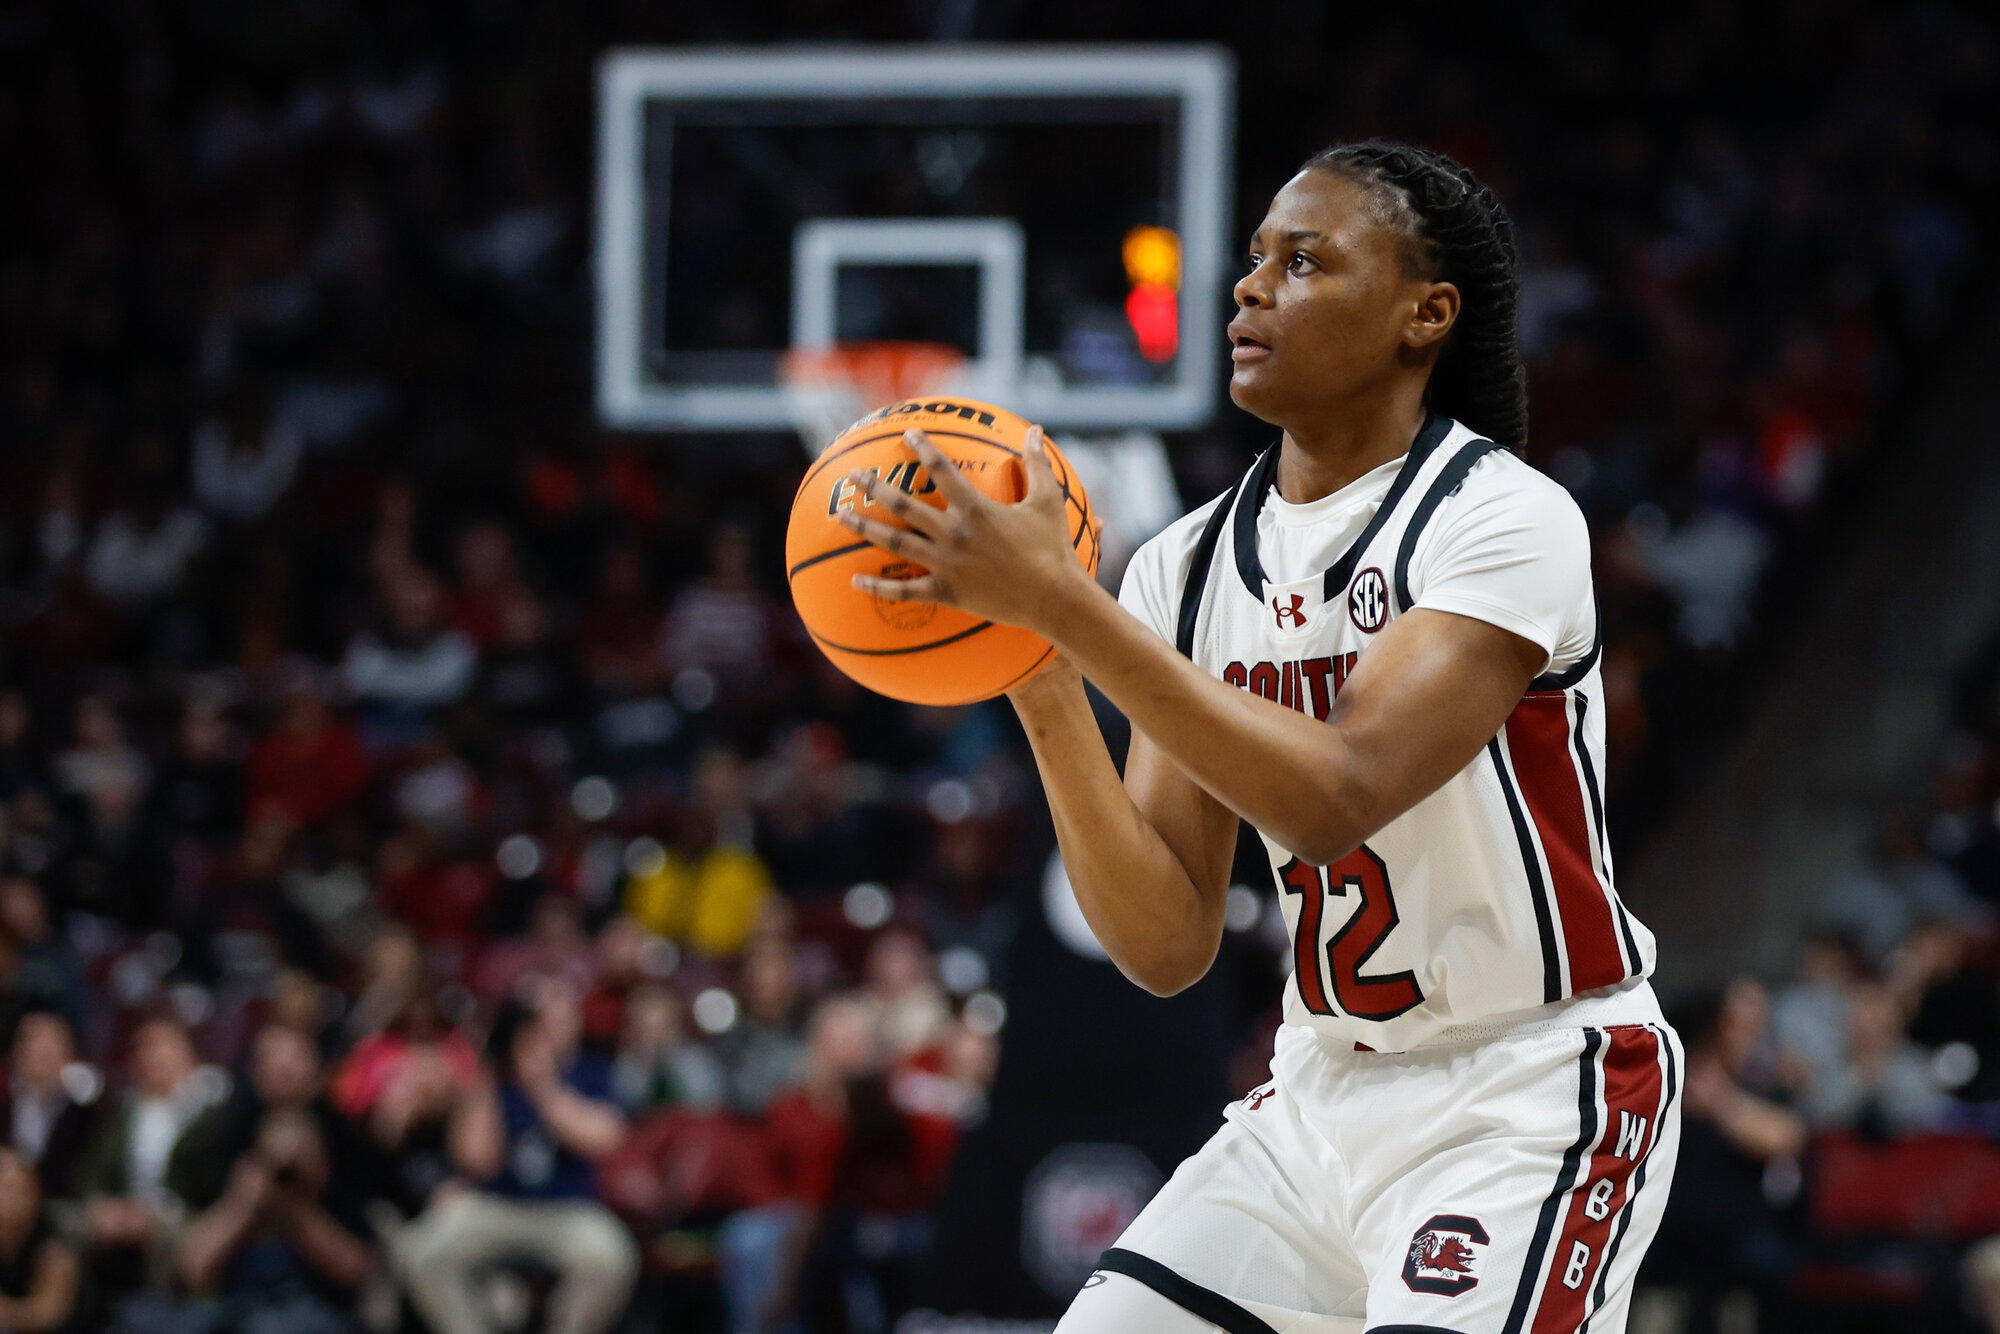 South Carolina guard MiLaysia Fulwiley looks to shoot against Missouri on Thursday in Columbia.